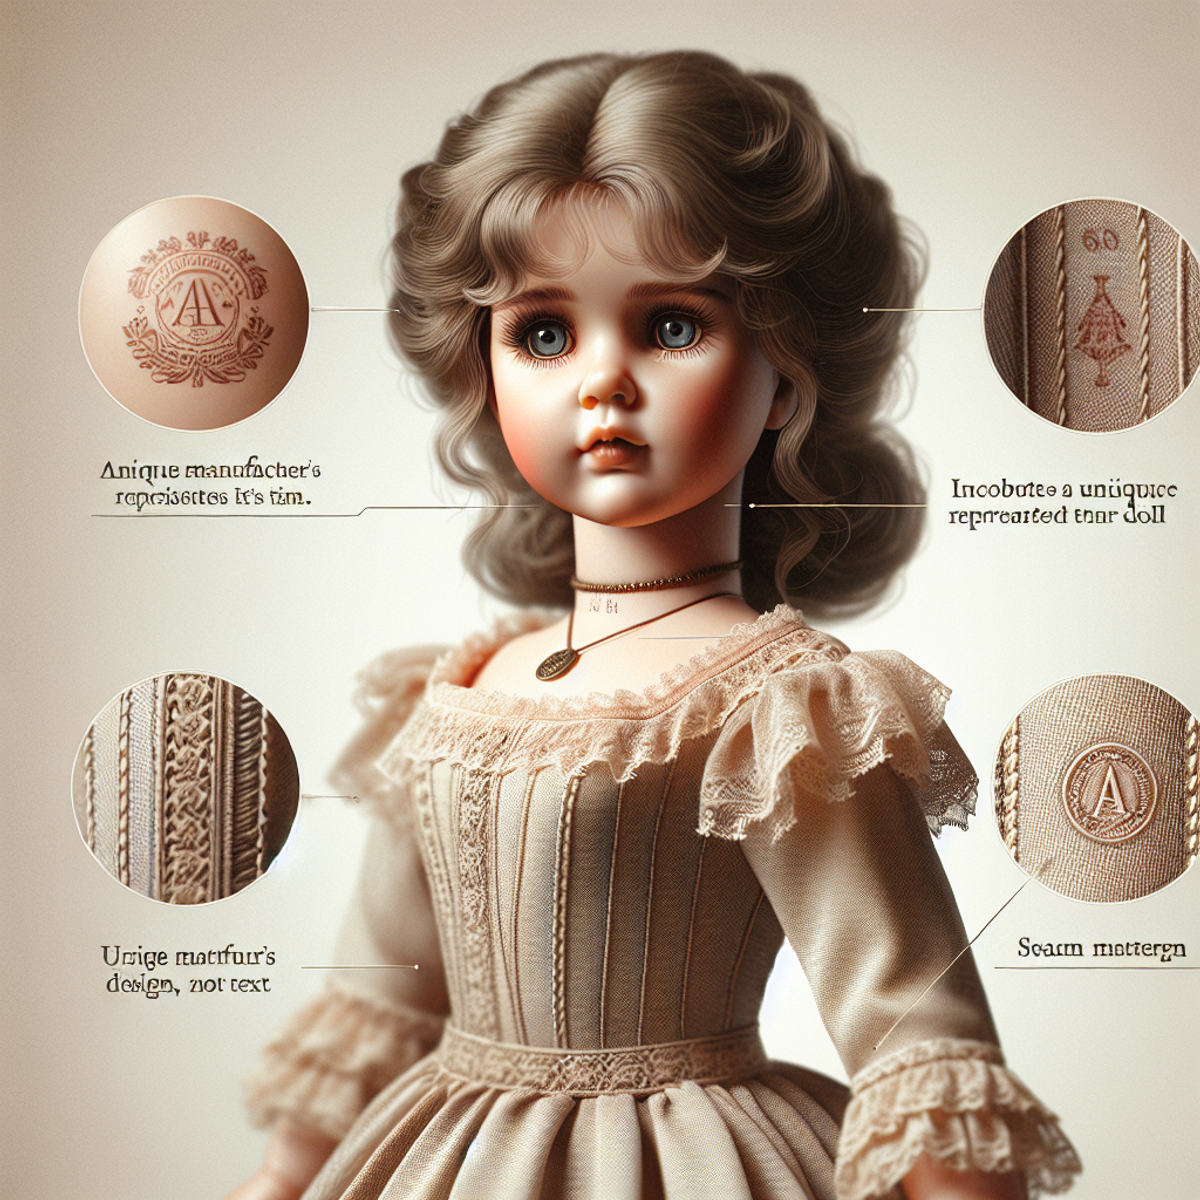 An antique doll with intricate details, dressed in era-appropriate attire, and featuring a unique manufacturer's design mark.